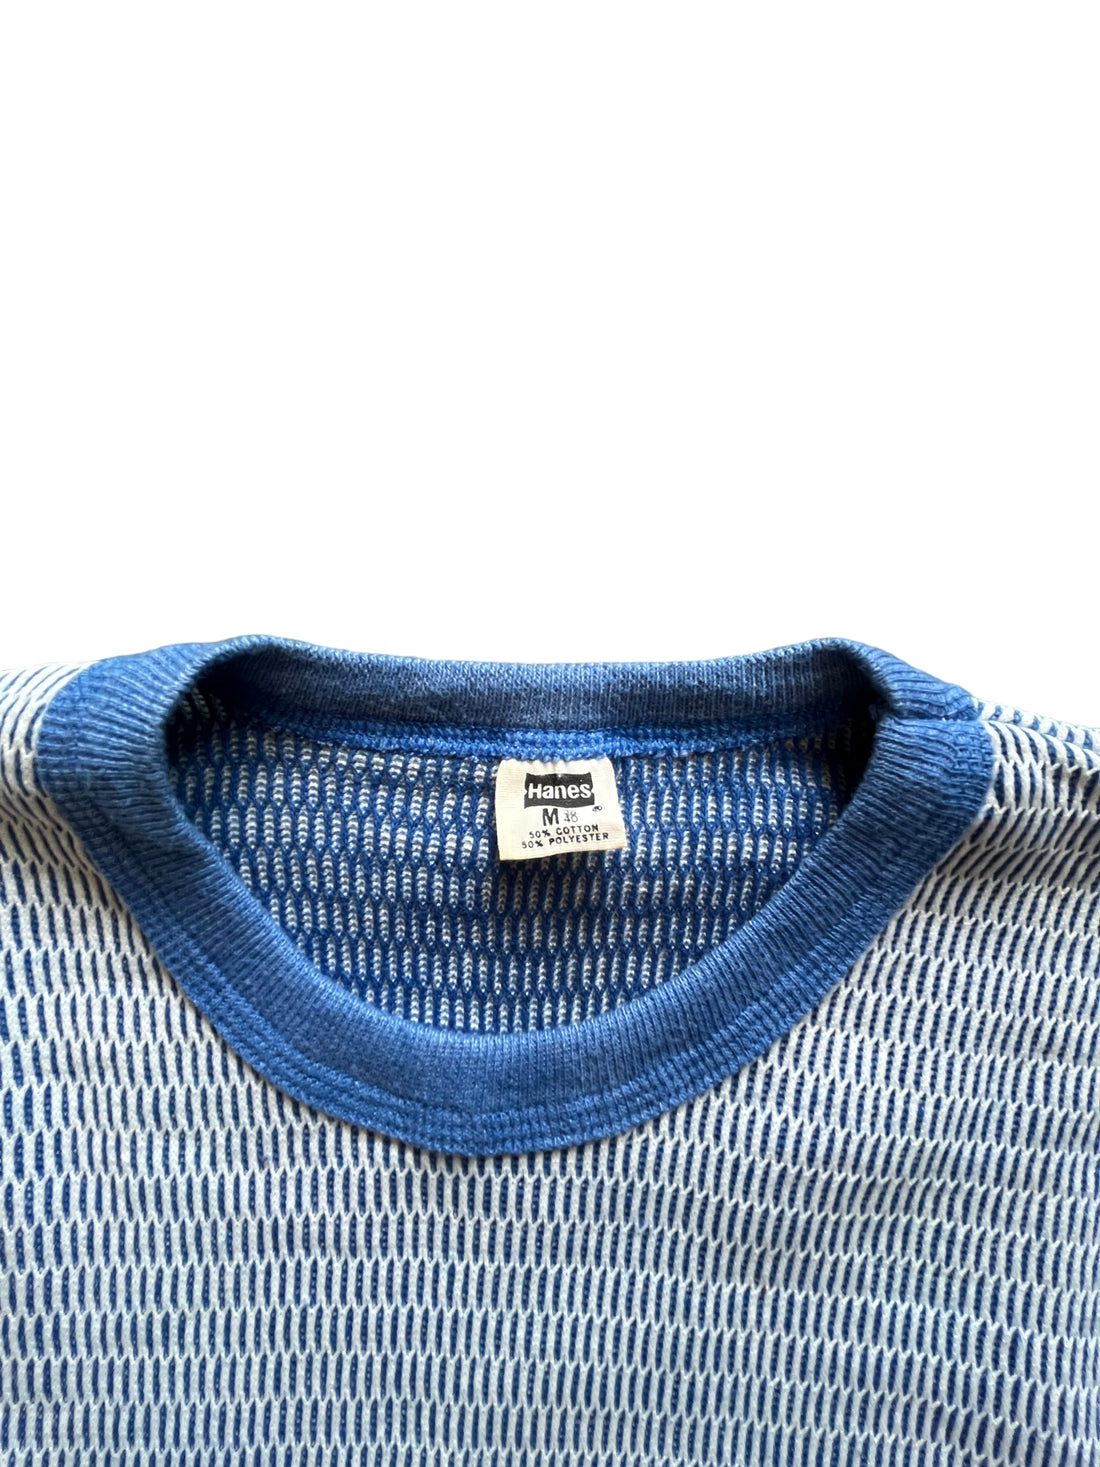 70’S HANES THERMAL CERULEAN AND WHITE - MEDIUM